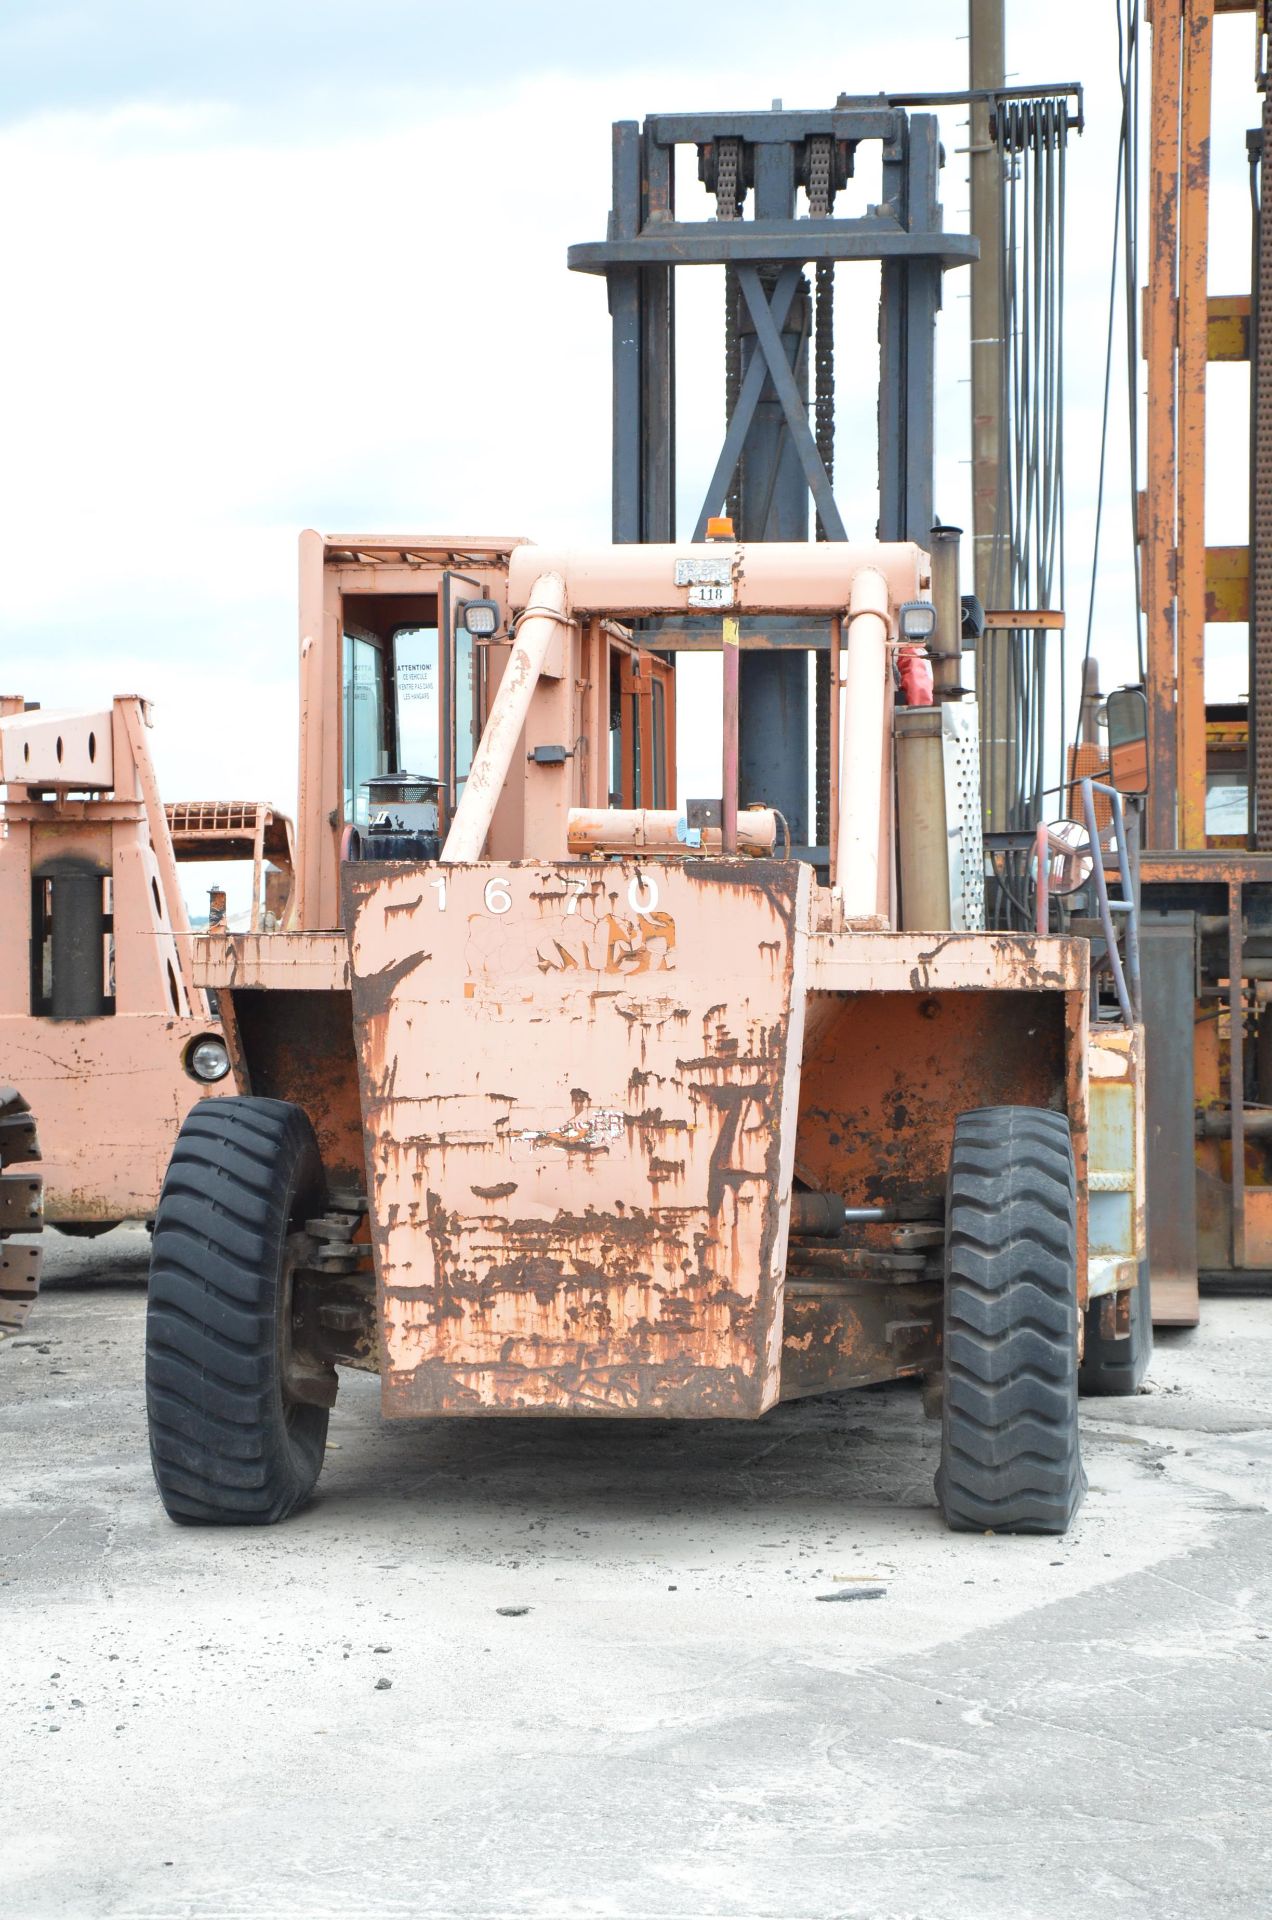 TAYLOR Y62 WOM HEAVY DUTY OUTDOOR DIESEL FORKLIFT WITH 62,000 LBS. CAPACITY - Image 17 of 21